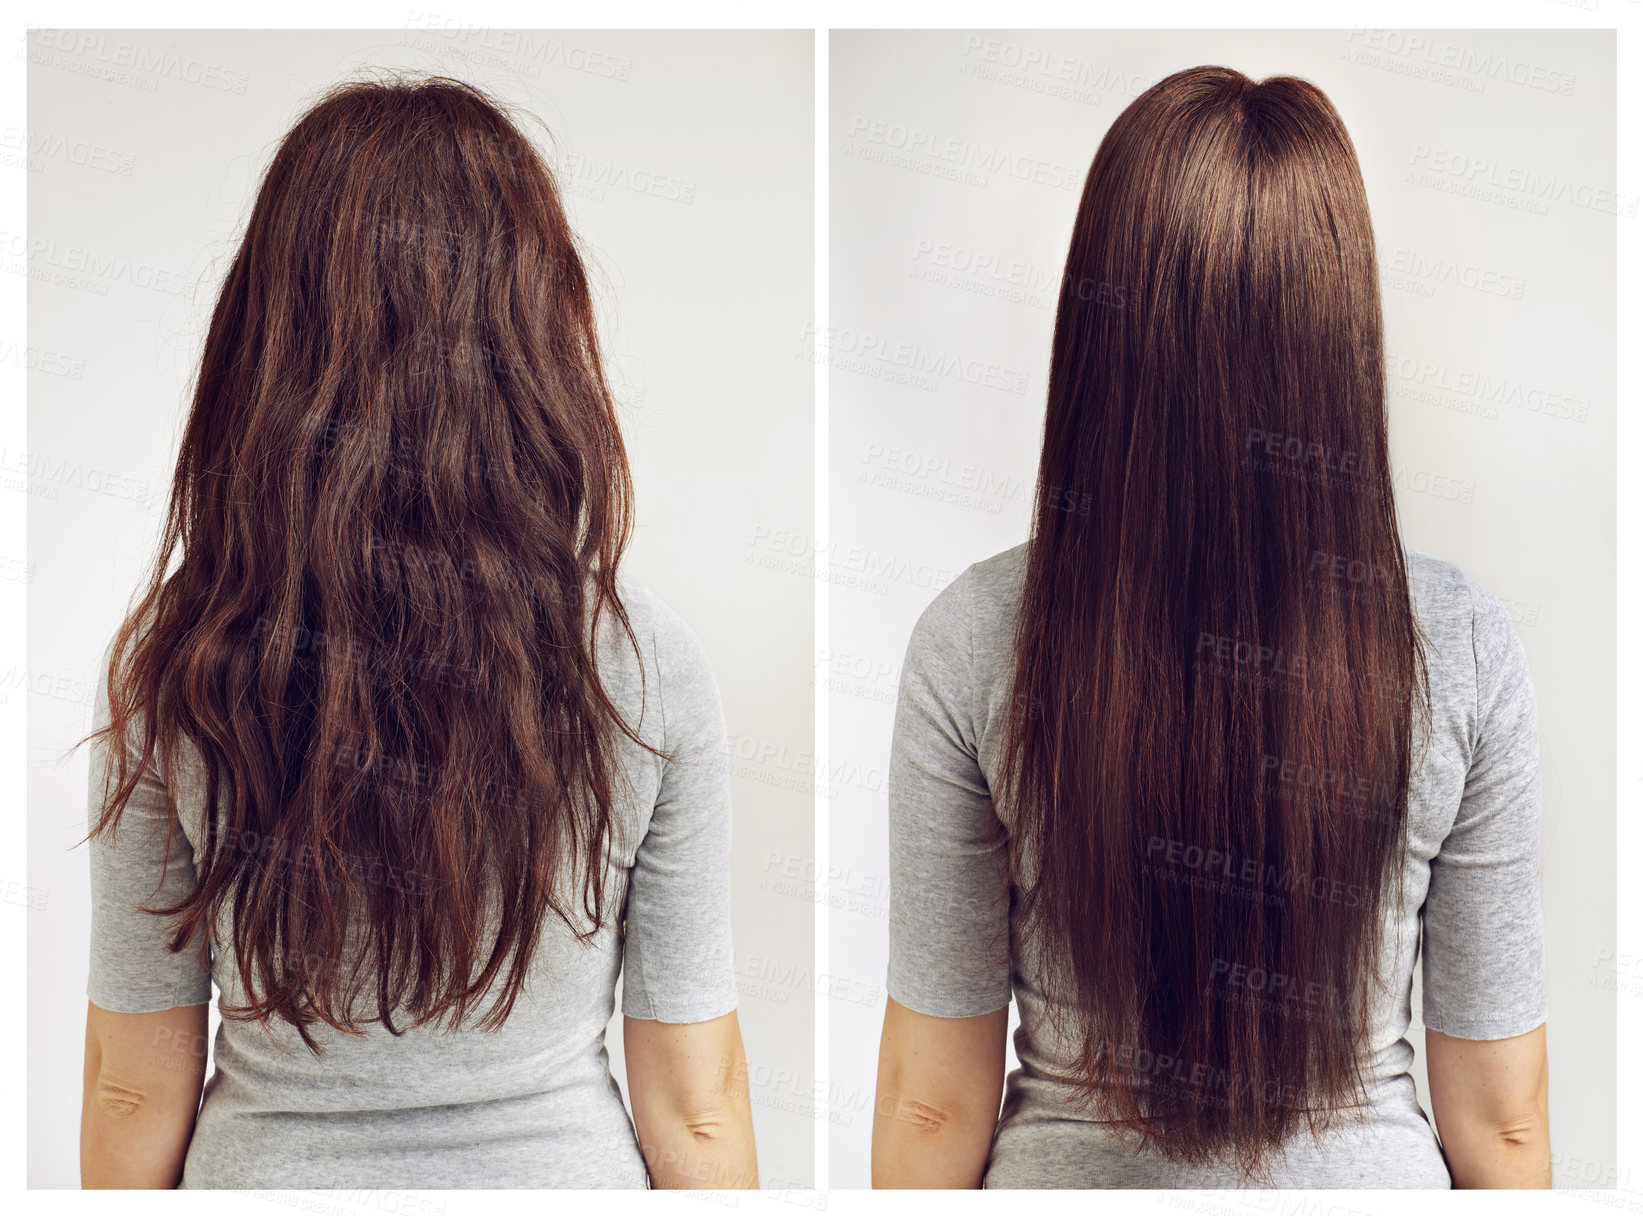 Buy stock photo Before and after shot of a woman with curly and straight hair